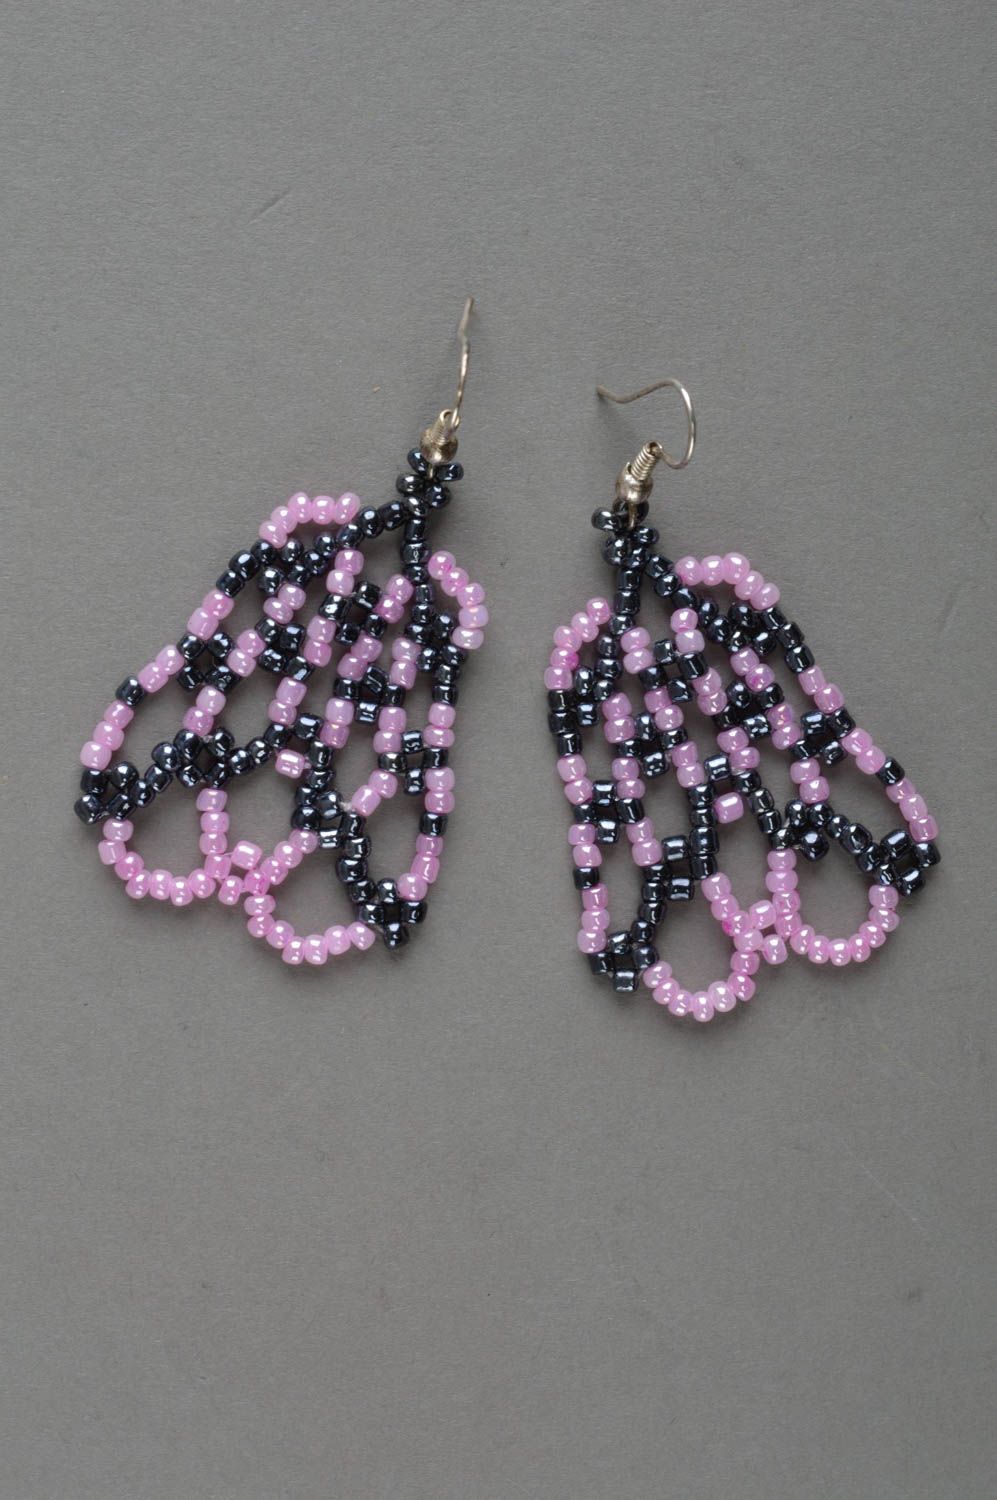 Large handmade beaded earrings designer jewelry fashion accessories gift ideas photo 2